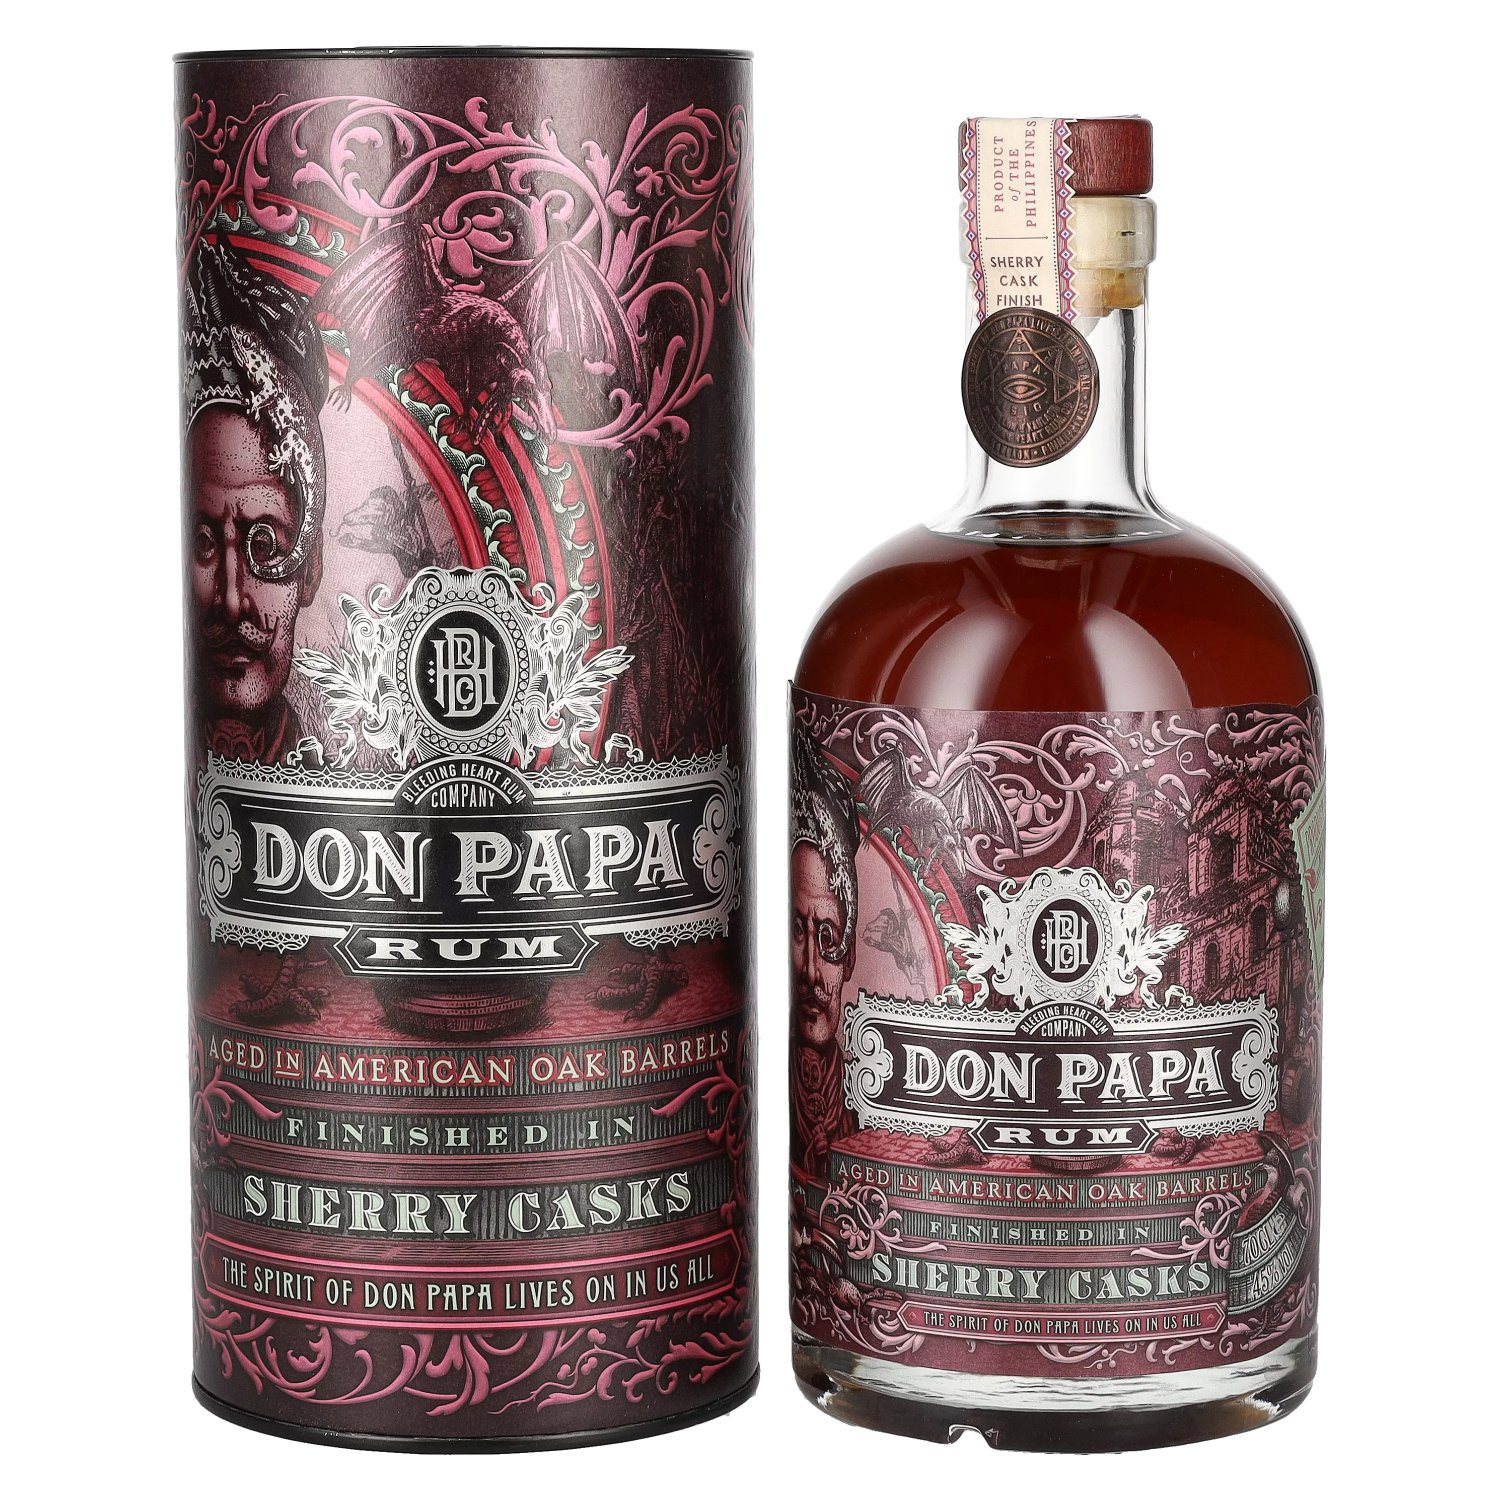 Don Papa Rum Sherry Casks Vol. 45% in Giftbox 0,7l